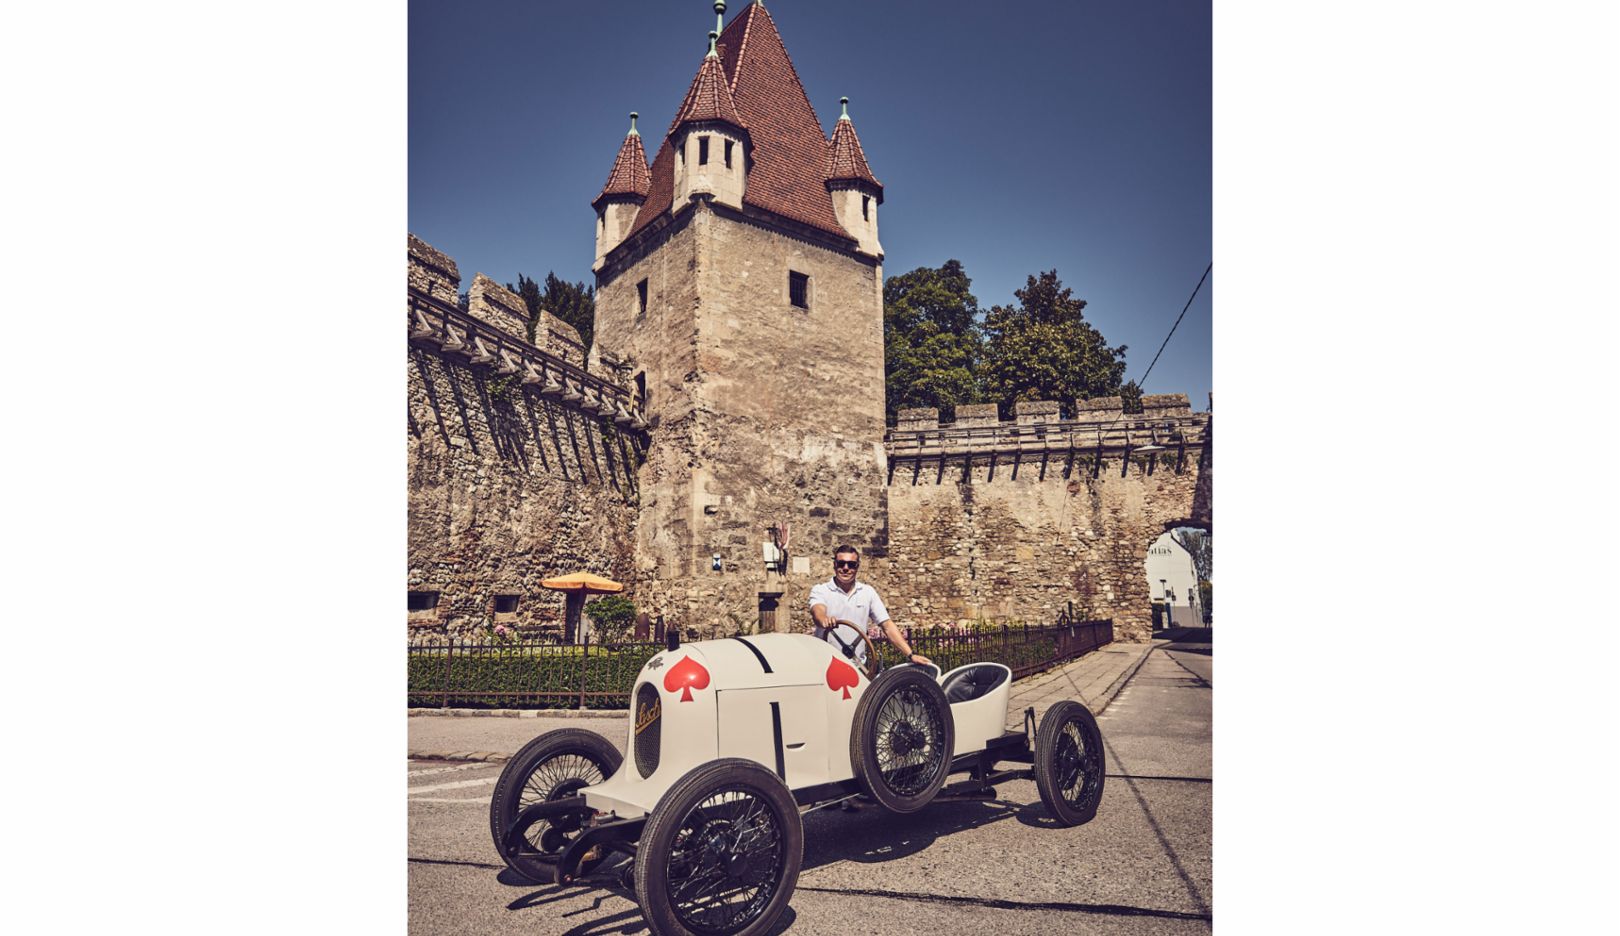 Sascha might have already driven around the 13th-century Reckturm tower more than 100 years ago.